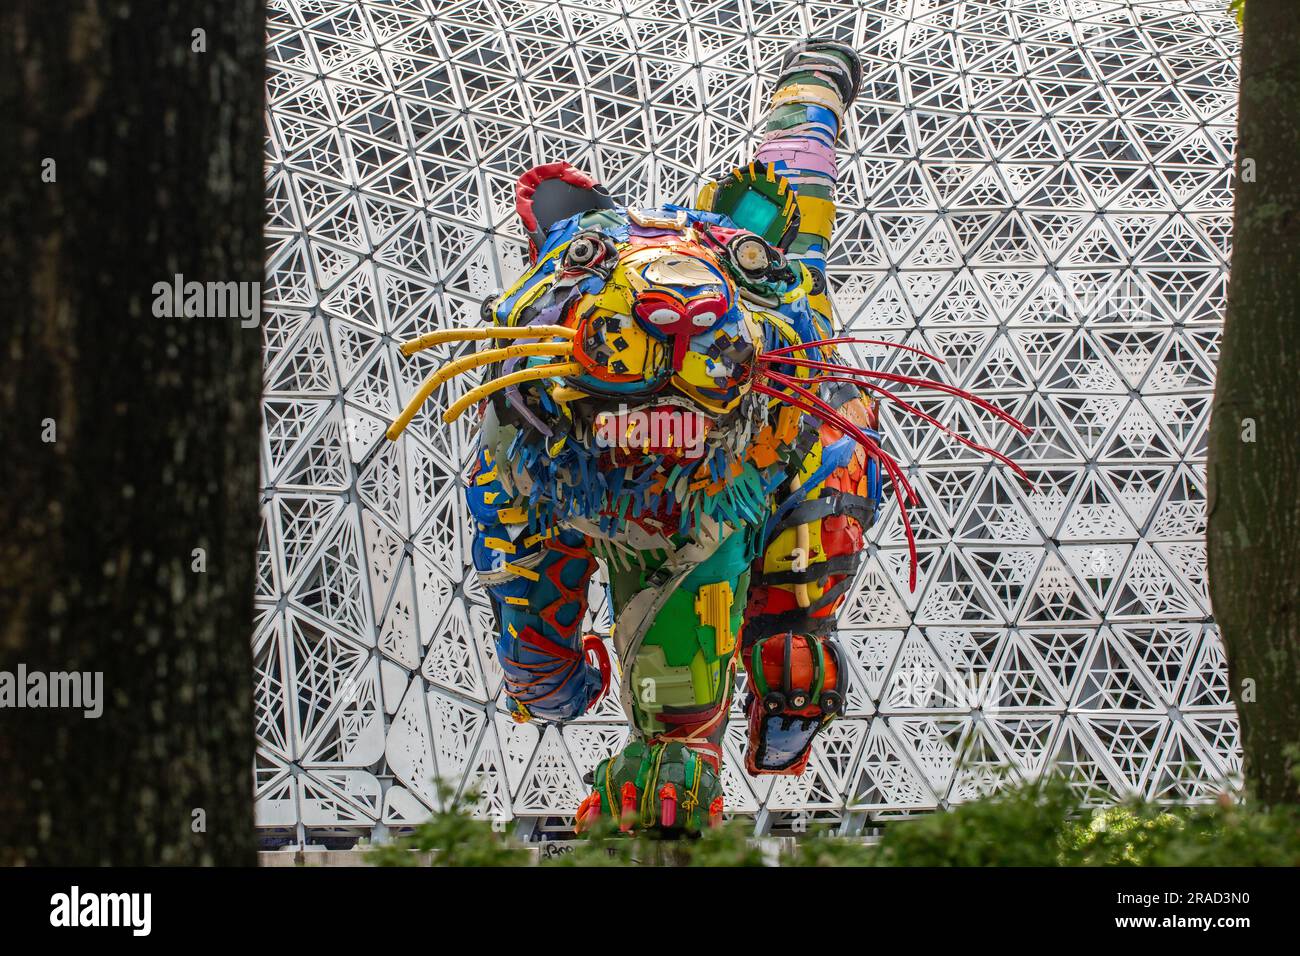 Art installation made of recycled plastic or waste produced by human, give the end-of-life materials an education concept for sustainability on earth. Stock Photo